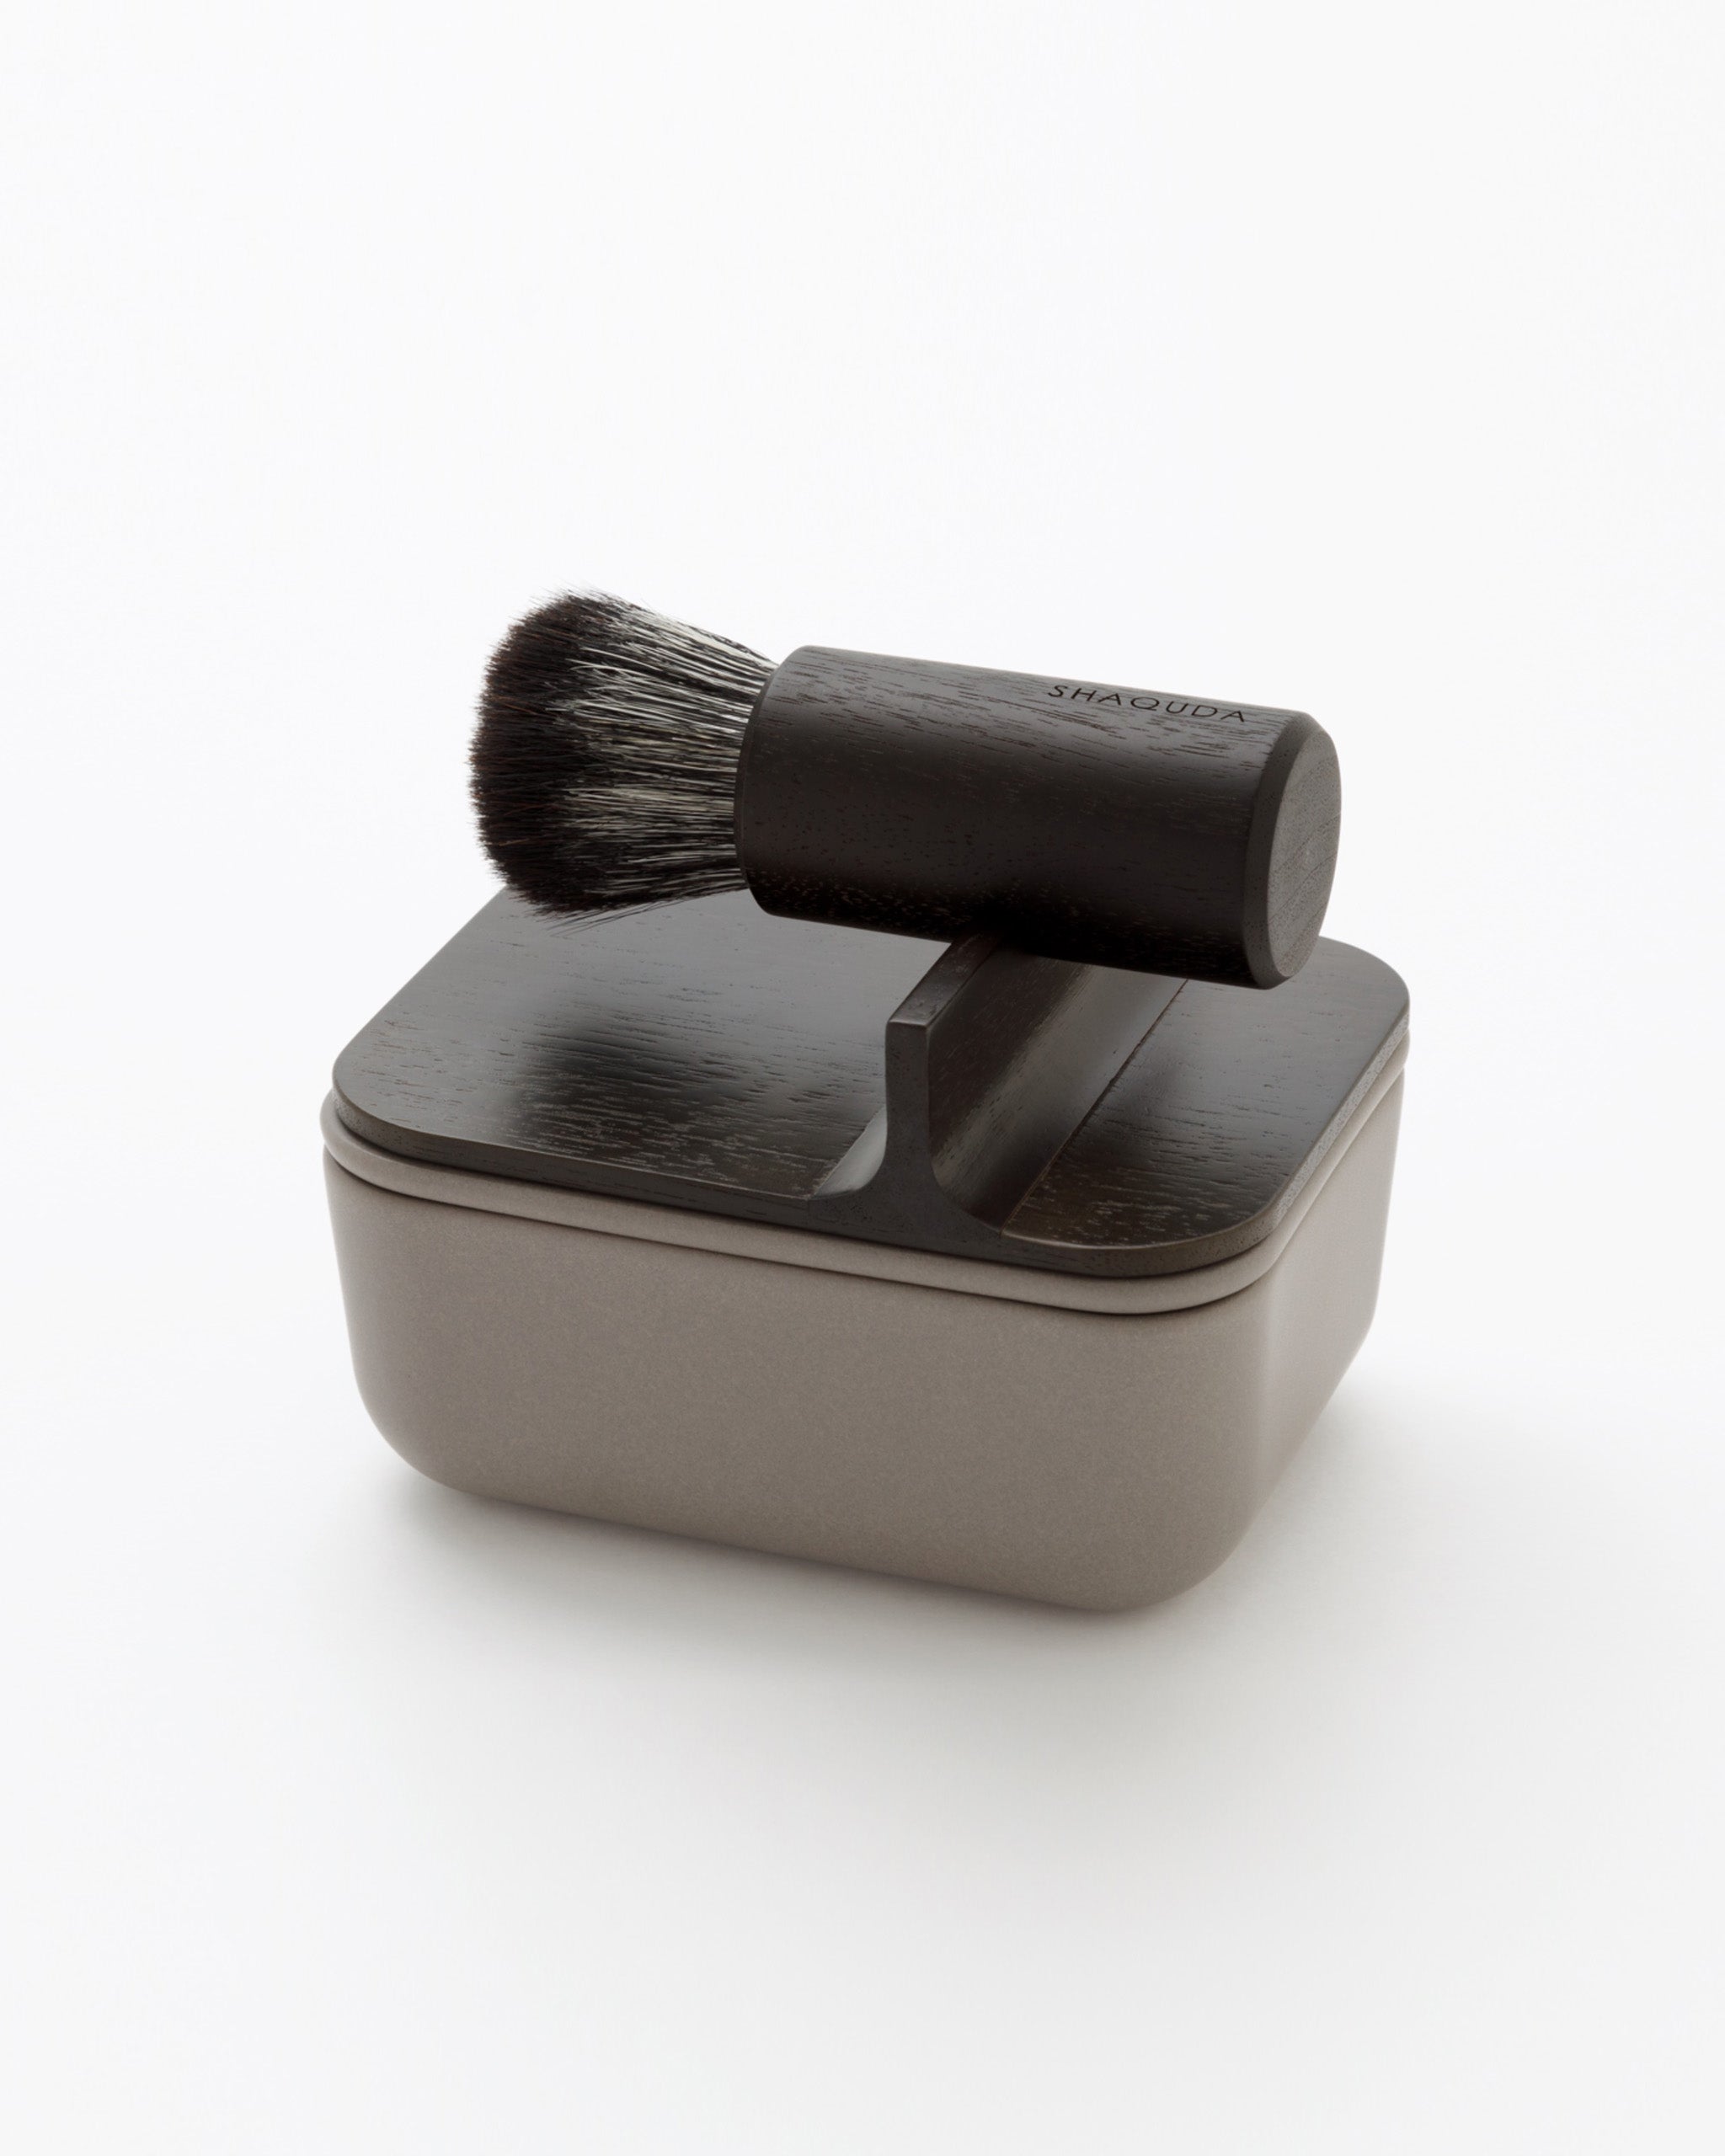 Angled image of hard Jiva face cleansing and shaving series with porcelain bowl and walnut, boar bristle, and goat hair brush by Shaquda against white-gray background. 